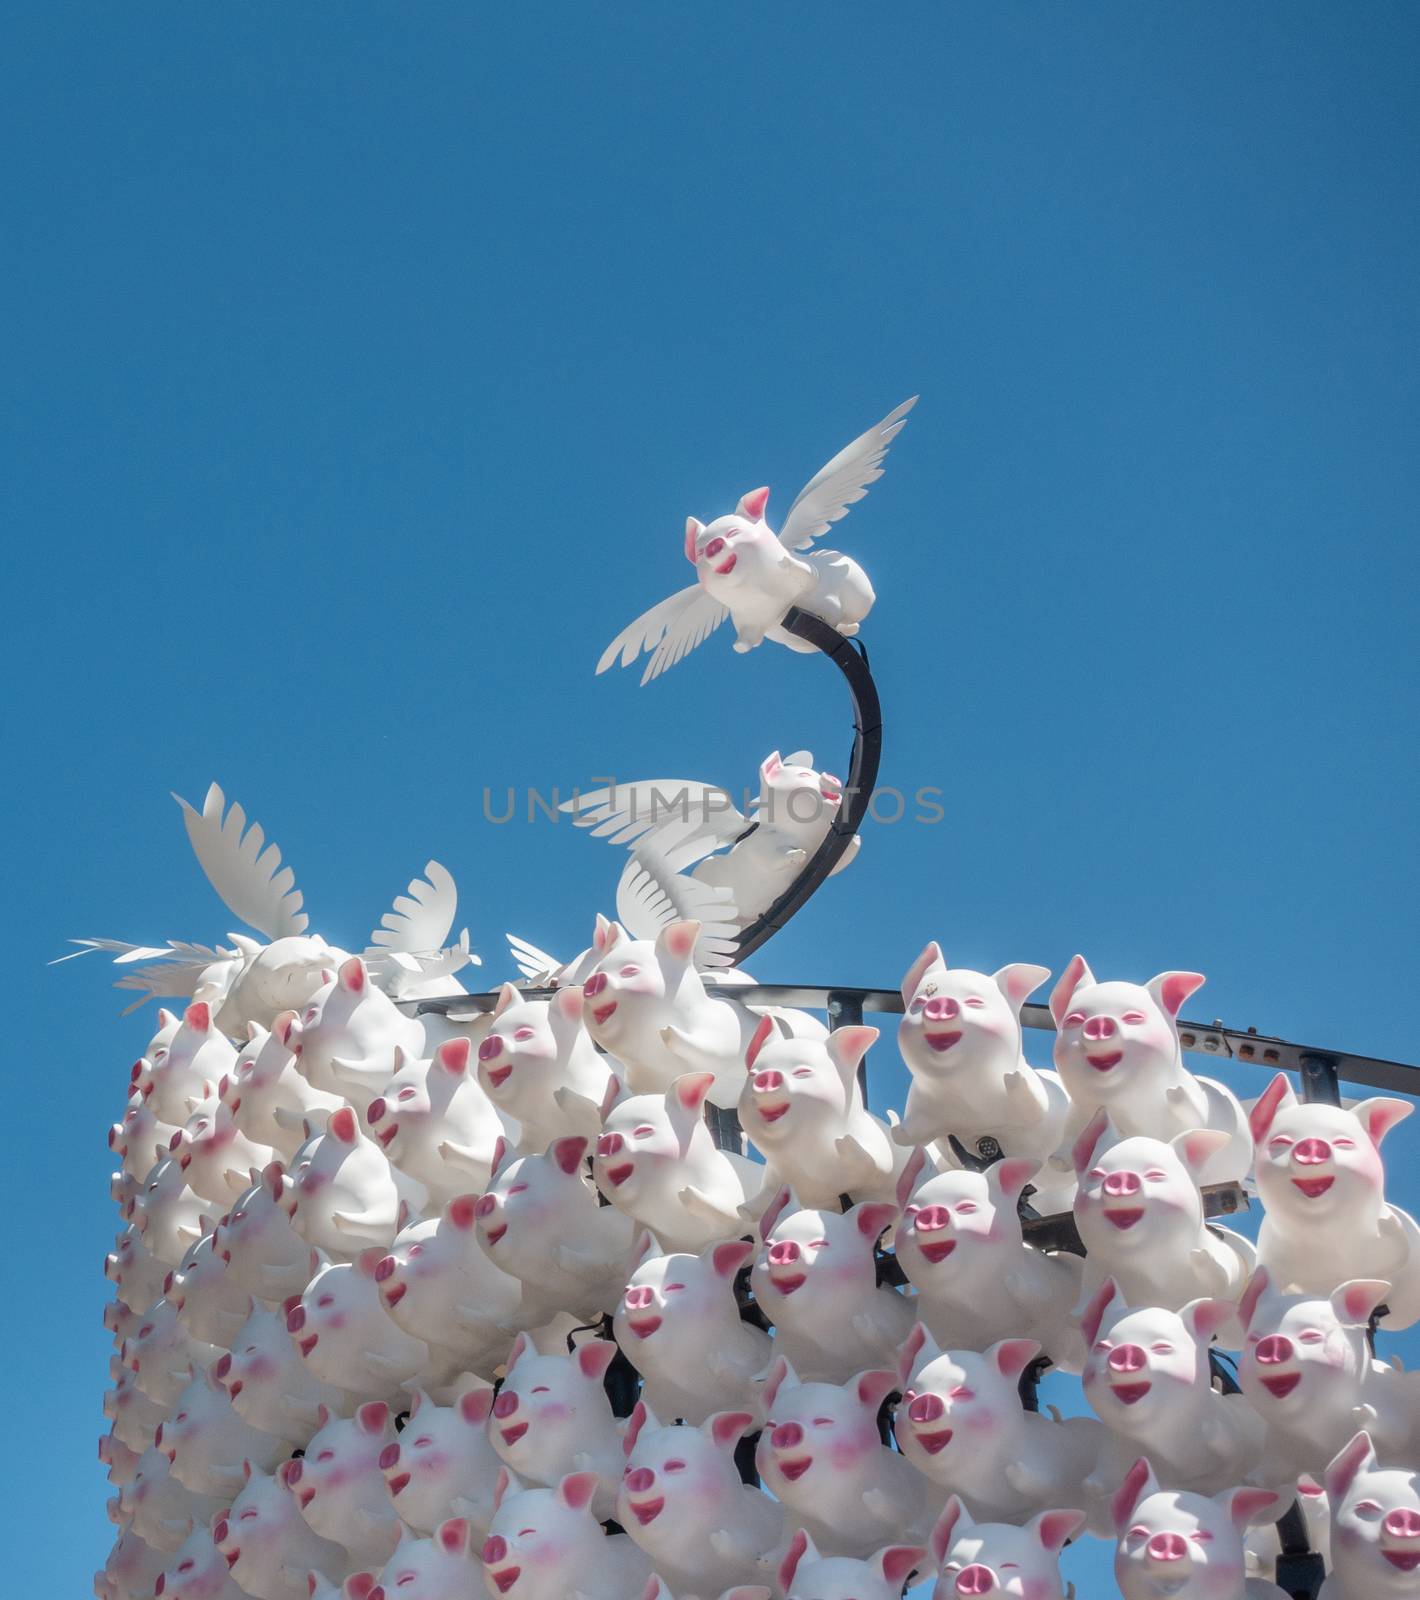 Sydney, Australia - February 9, 2019: Closeup of large display of many laughing pig dolls at First Fleet Park downtown to celebrate Chinese Year of the Pig. White skin with pink features, Blue sky.